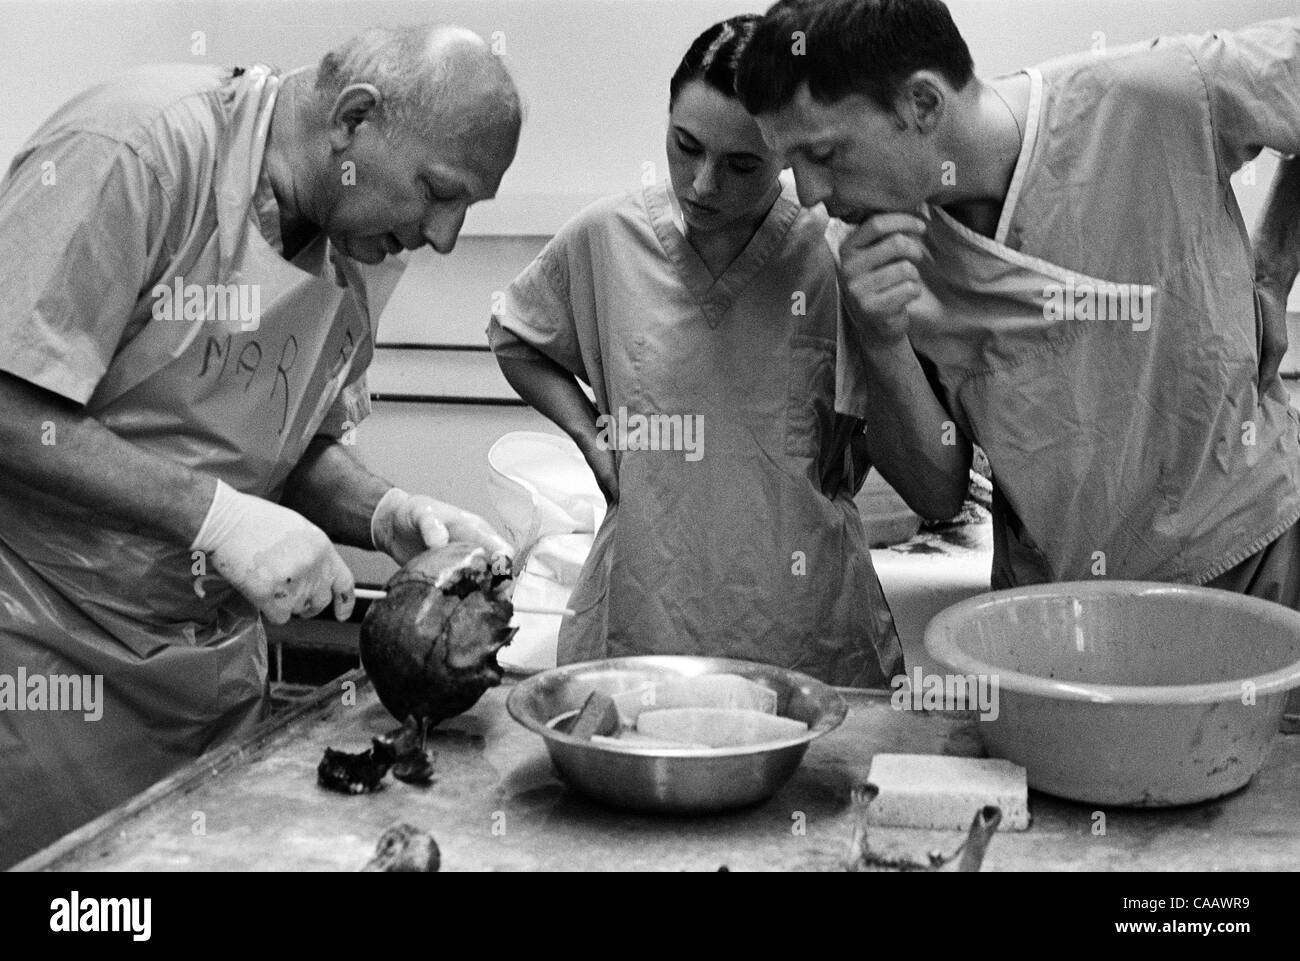 A UN forensic anthropologist at the morgue in Orahovac/Rahovec, Kosovo, shows two interns the trajectory of a bullet through the skull of an Albanian man, a victim of war crimes, possibly by the Albanian Kosovo Liberation Army. Stock Photo